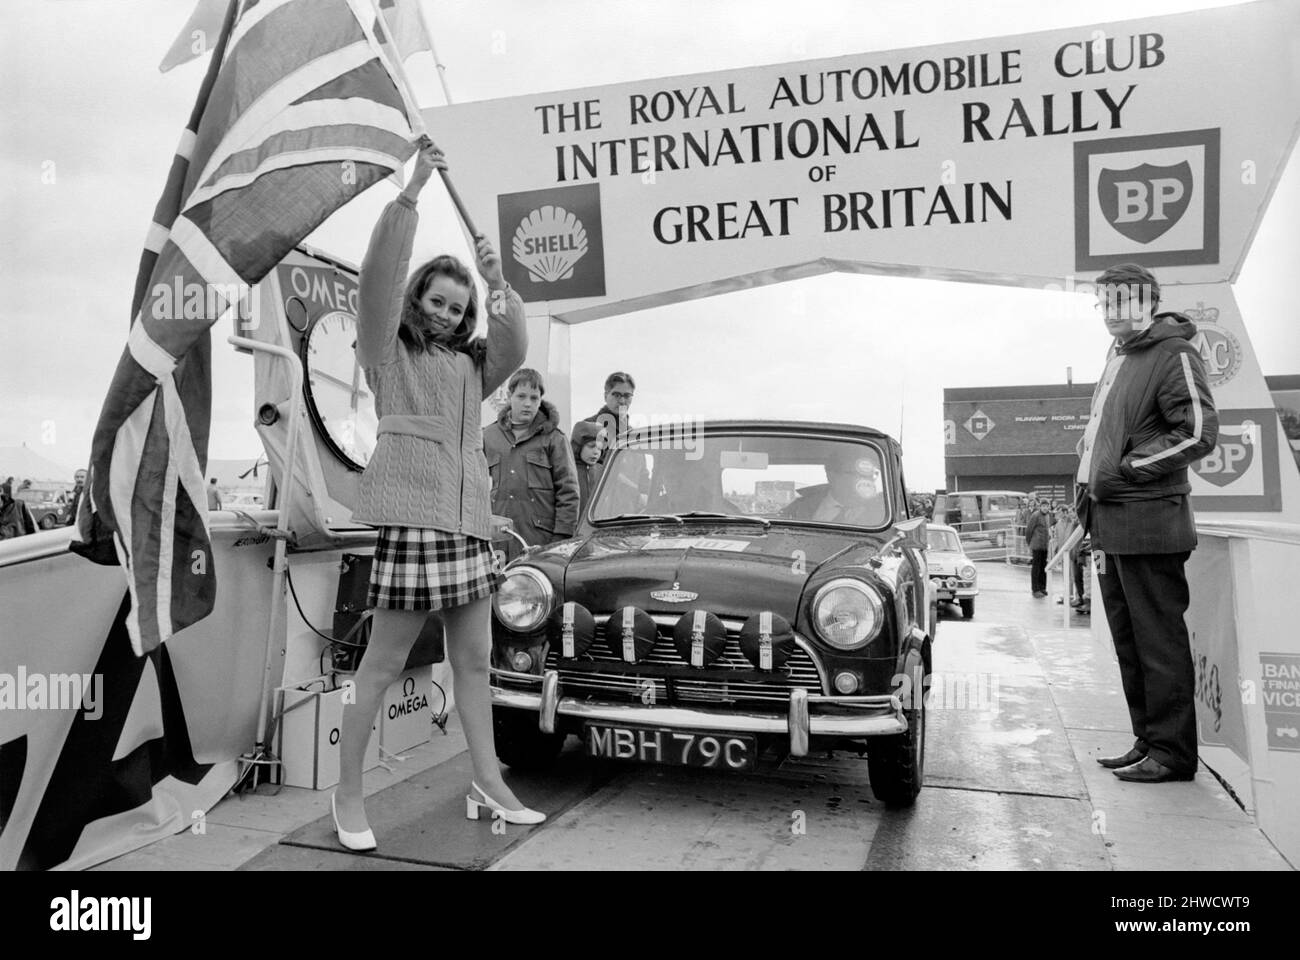 R.A.C. Rally: Miss U.K. Sheena Drummond, Waves the flag for the start of the R.A.C. Rally. November 1969 Z11051-002 Stock Photo